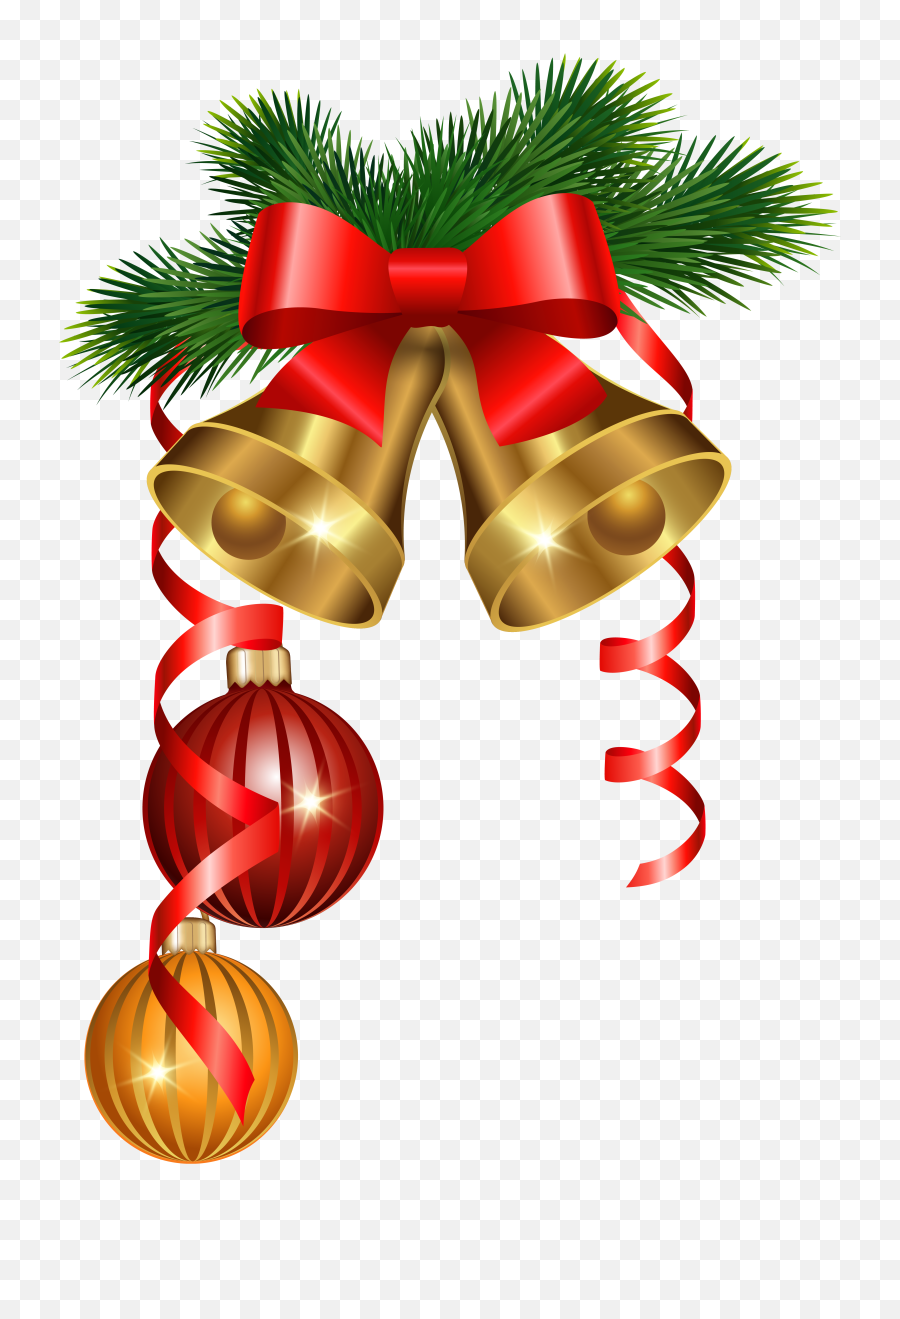 Christmas Golden Bells And Ornaments Png Clipart Image - Transparent Background Christmas Bell Png,Ornaments Png